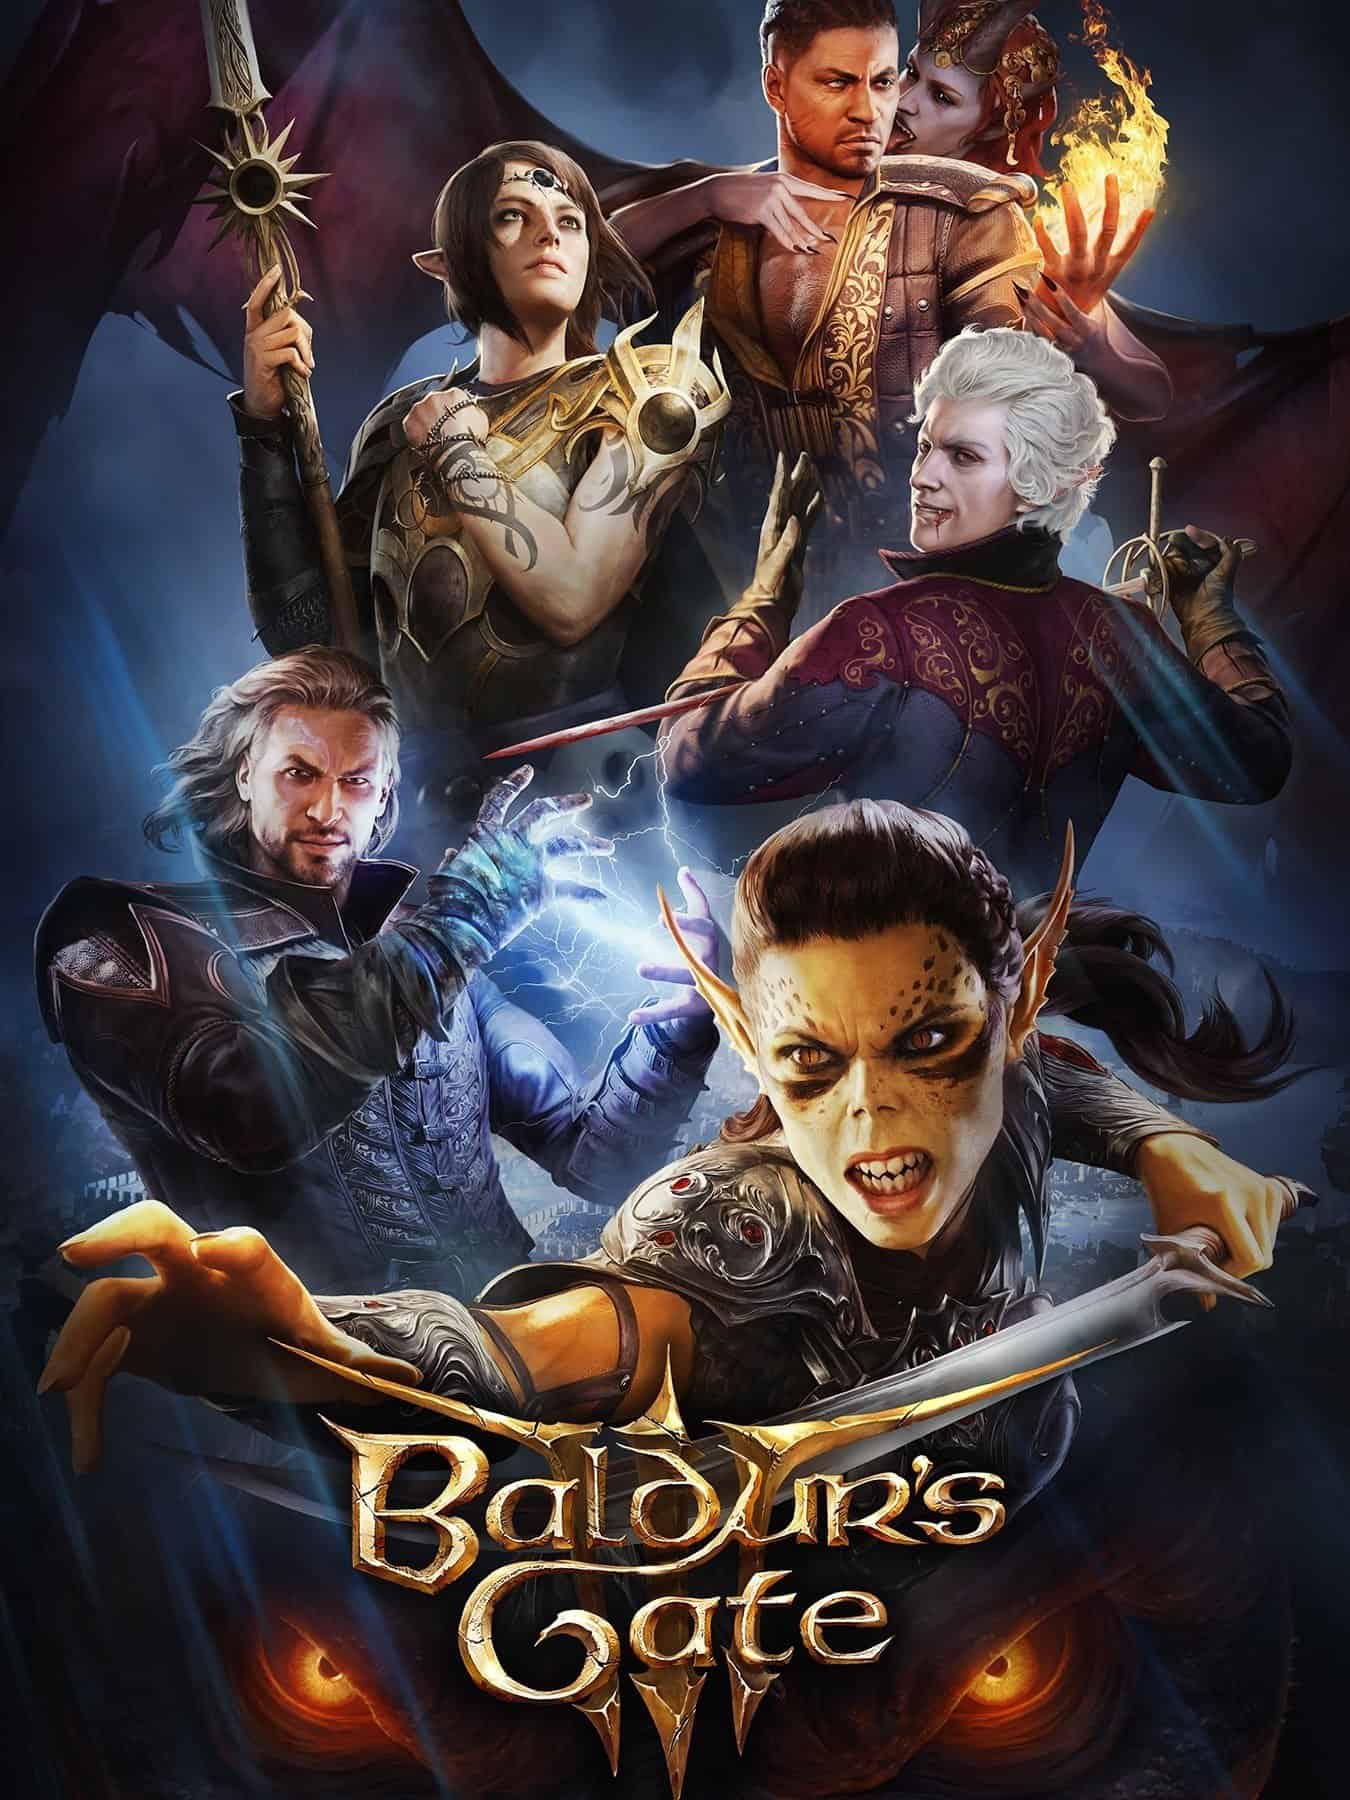 Does Baldur's Gate 3 Have Cross-Play and Cross-Progression? - GameRevolution